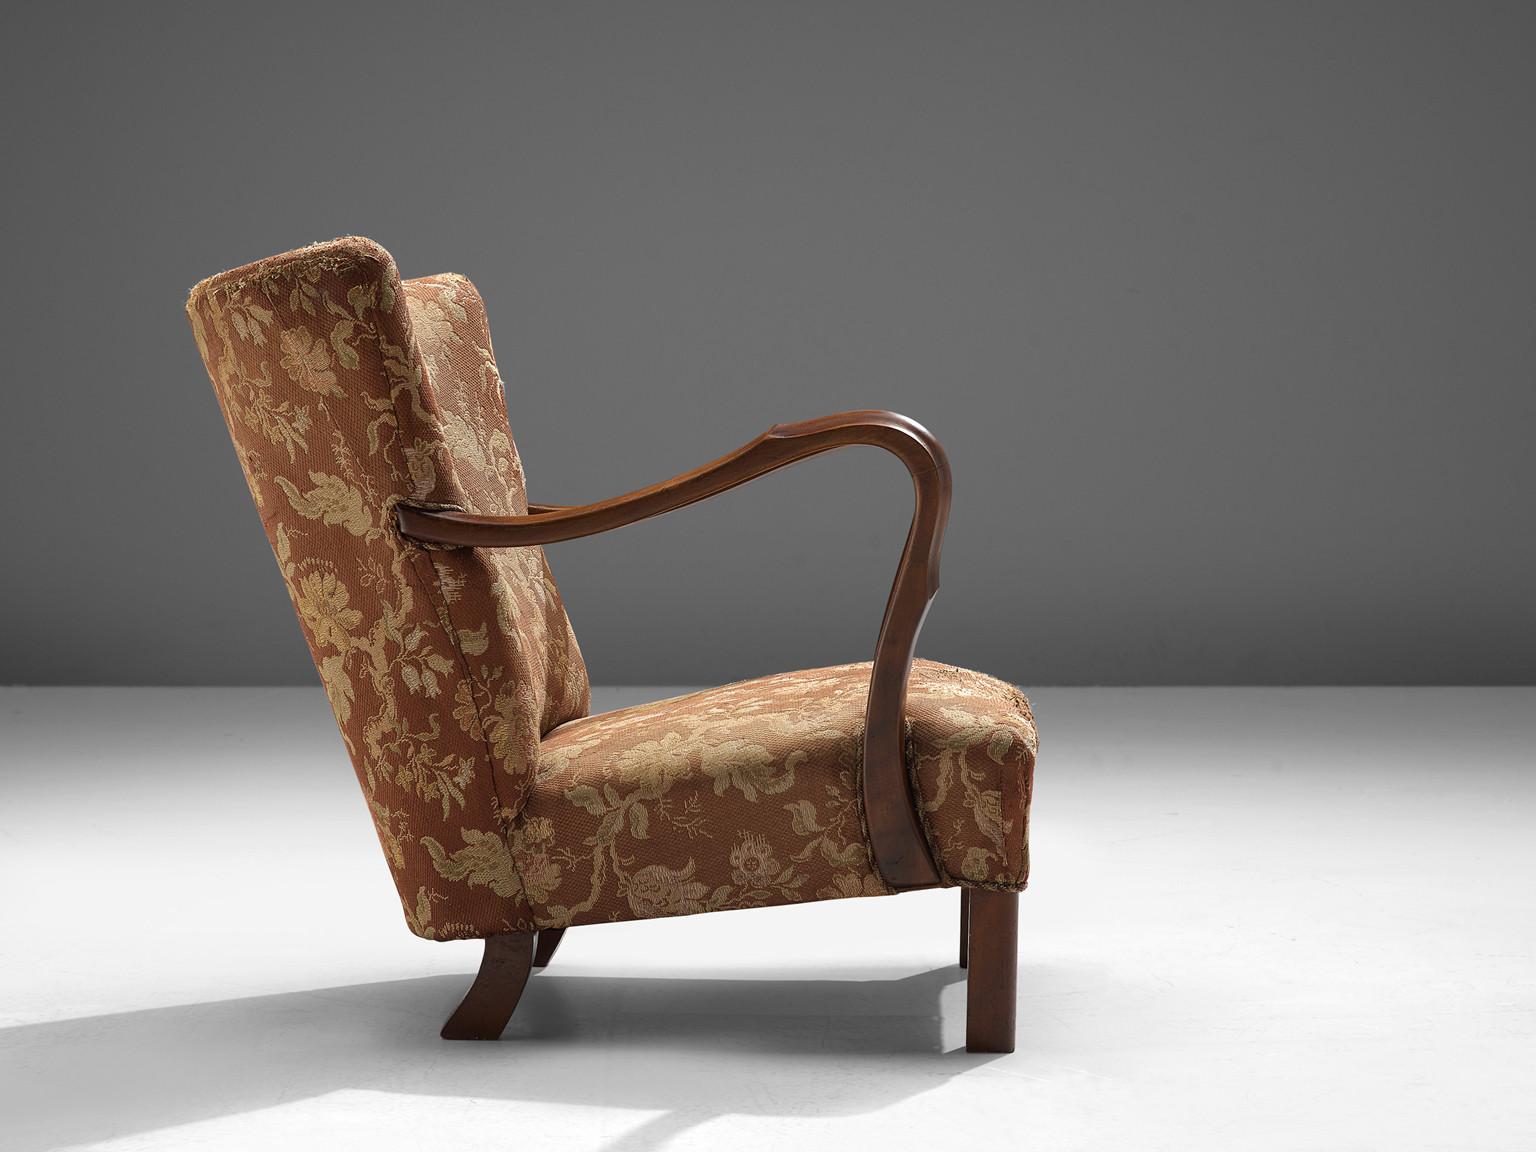 Mid-20th Century Italian Art Deco Lounge Chair in Floral Upholstery